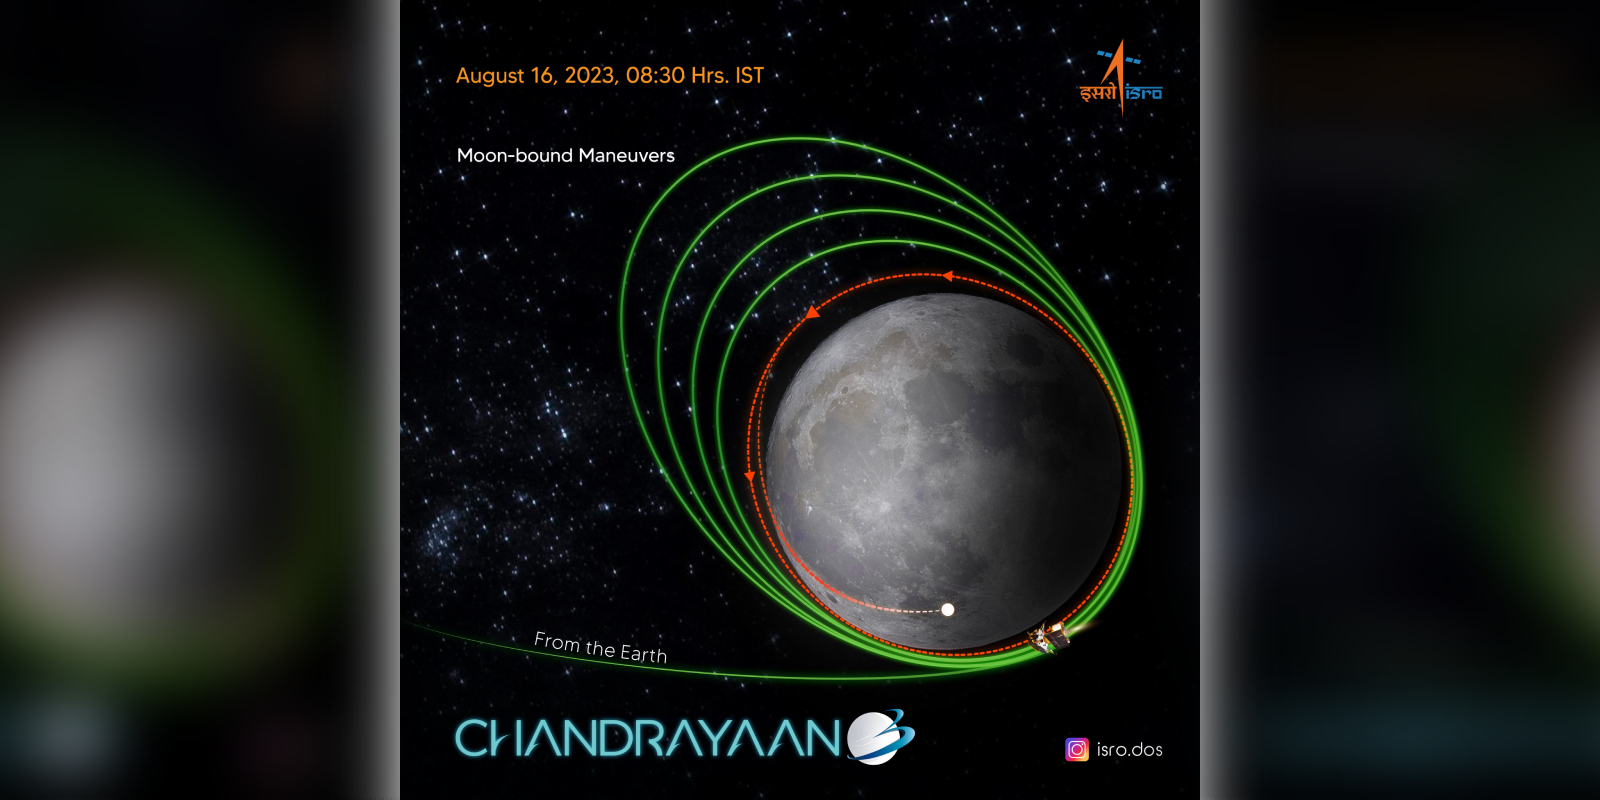 Chandrayaan 3 closer to moon as it completes its final Moon bound manoeuvre